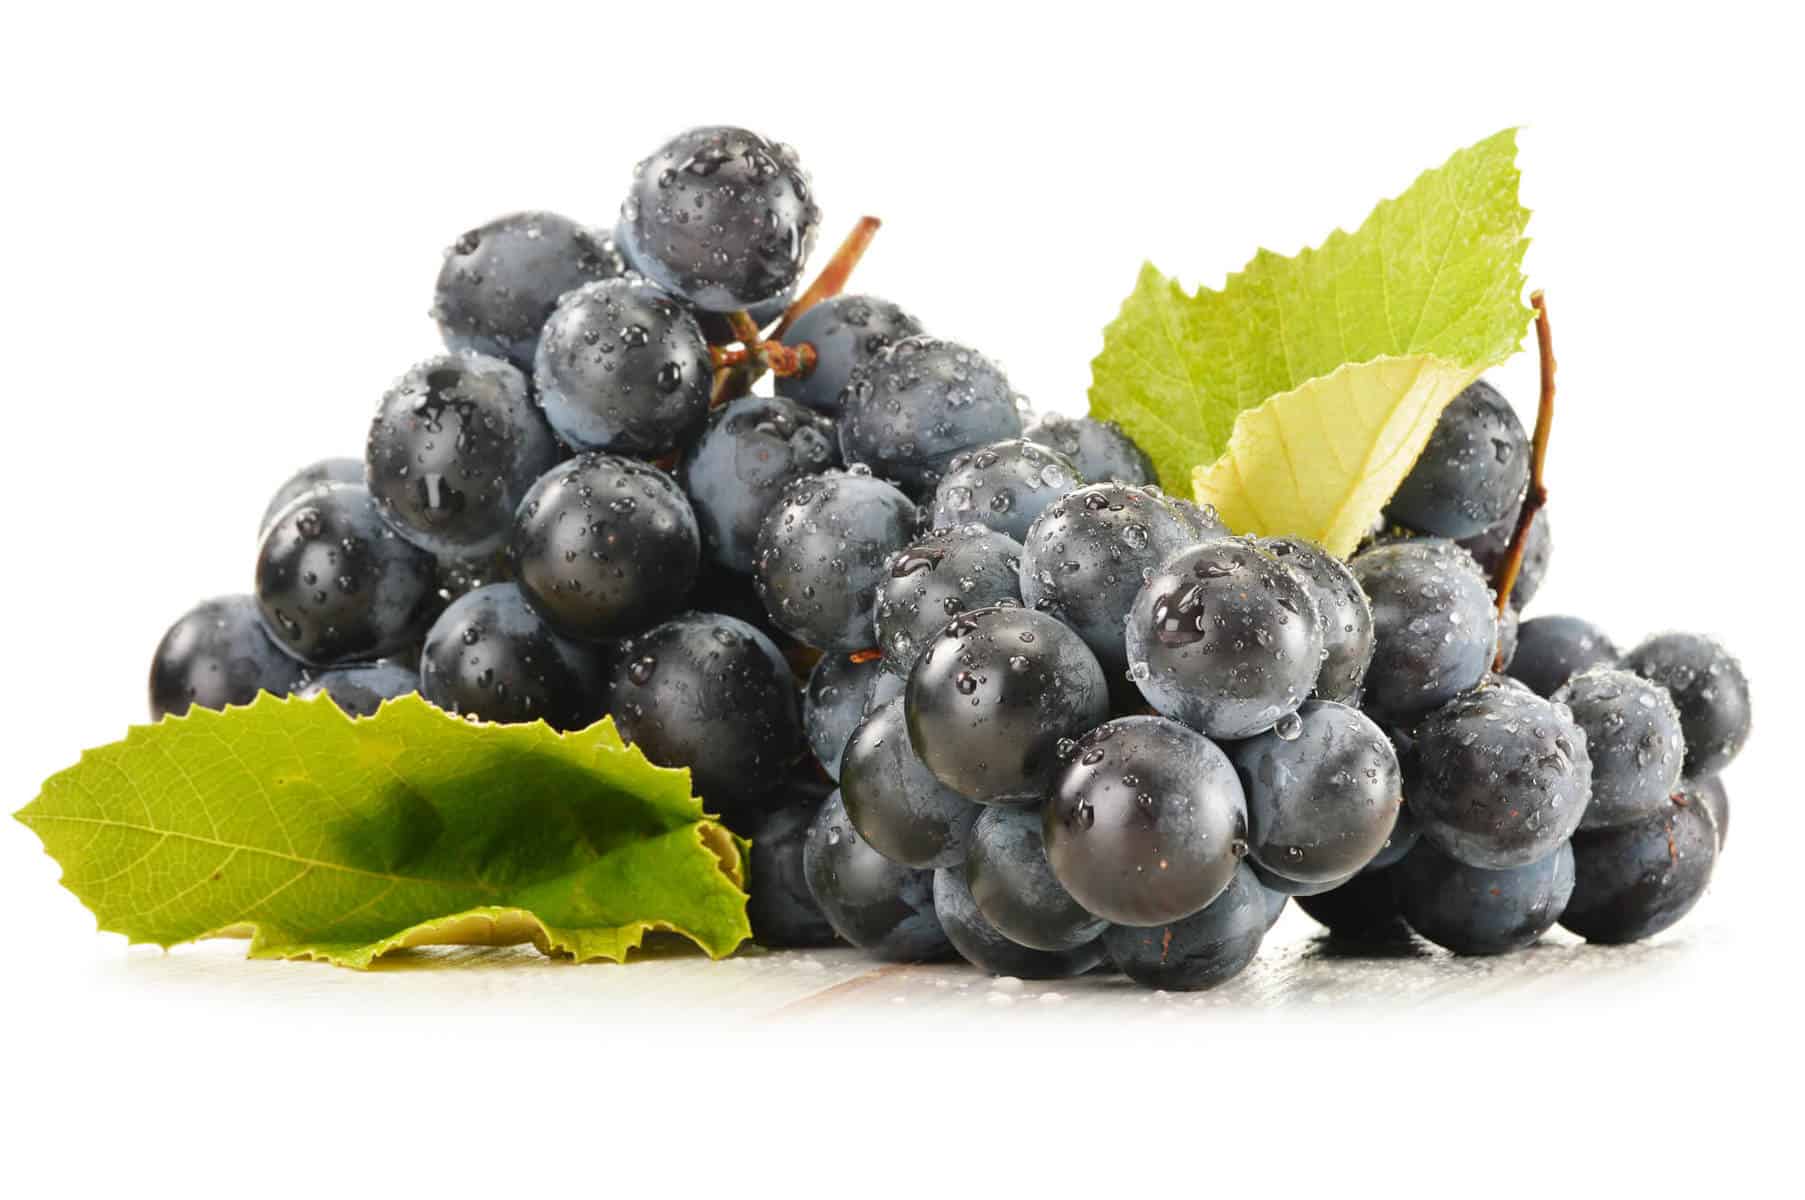 How to Choose the Best Resveratrol Supplements (2019 Update)